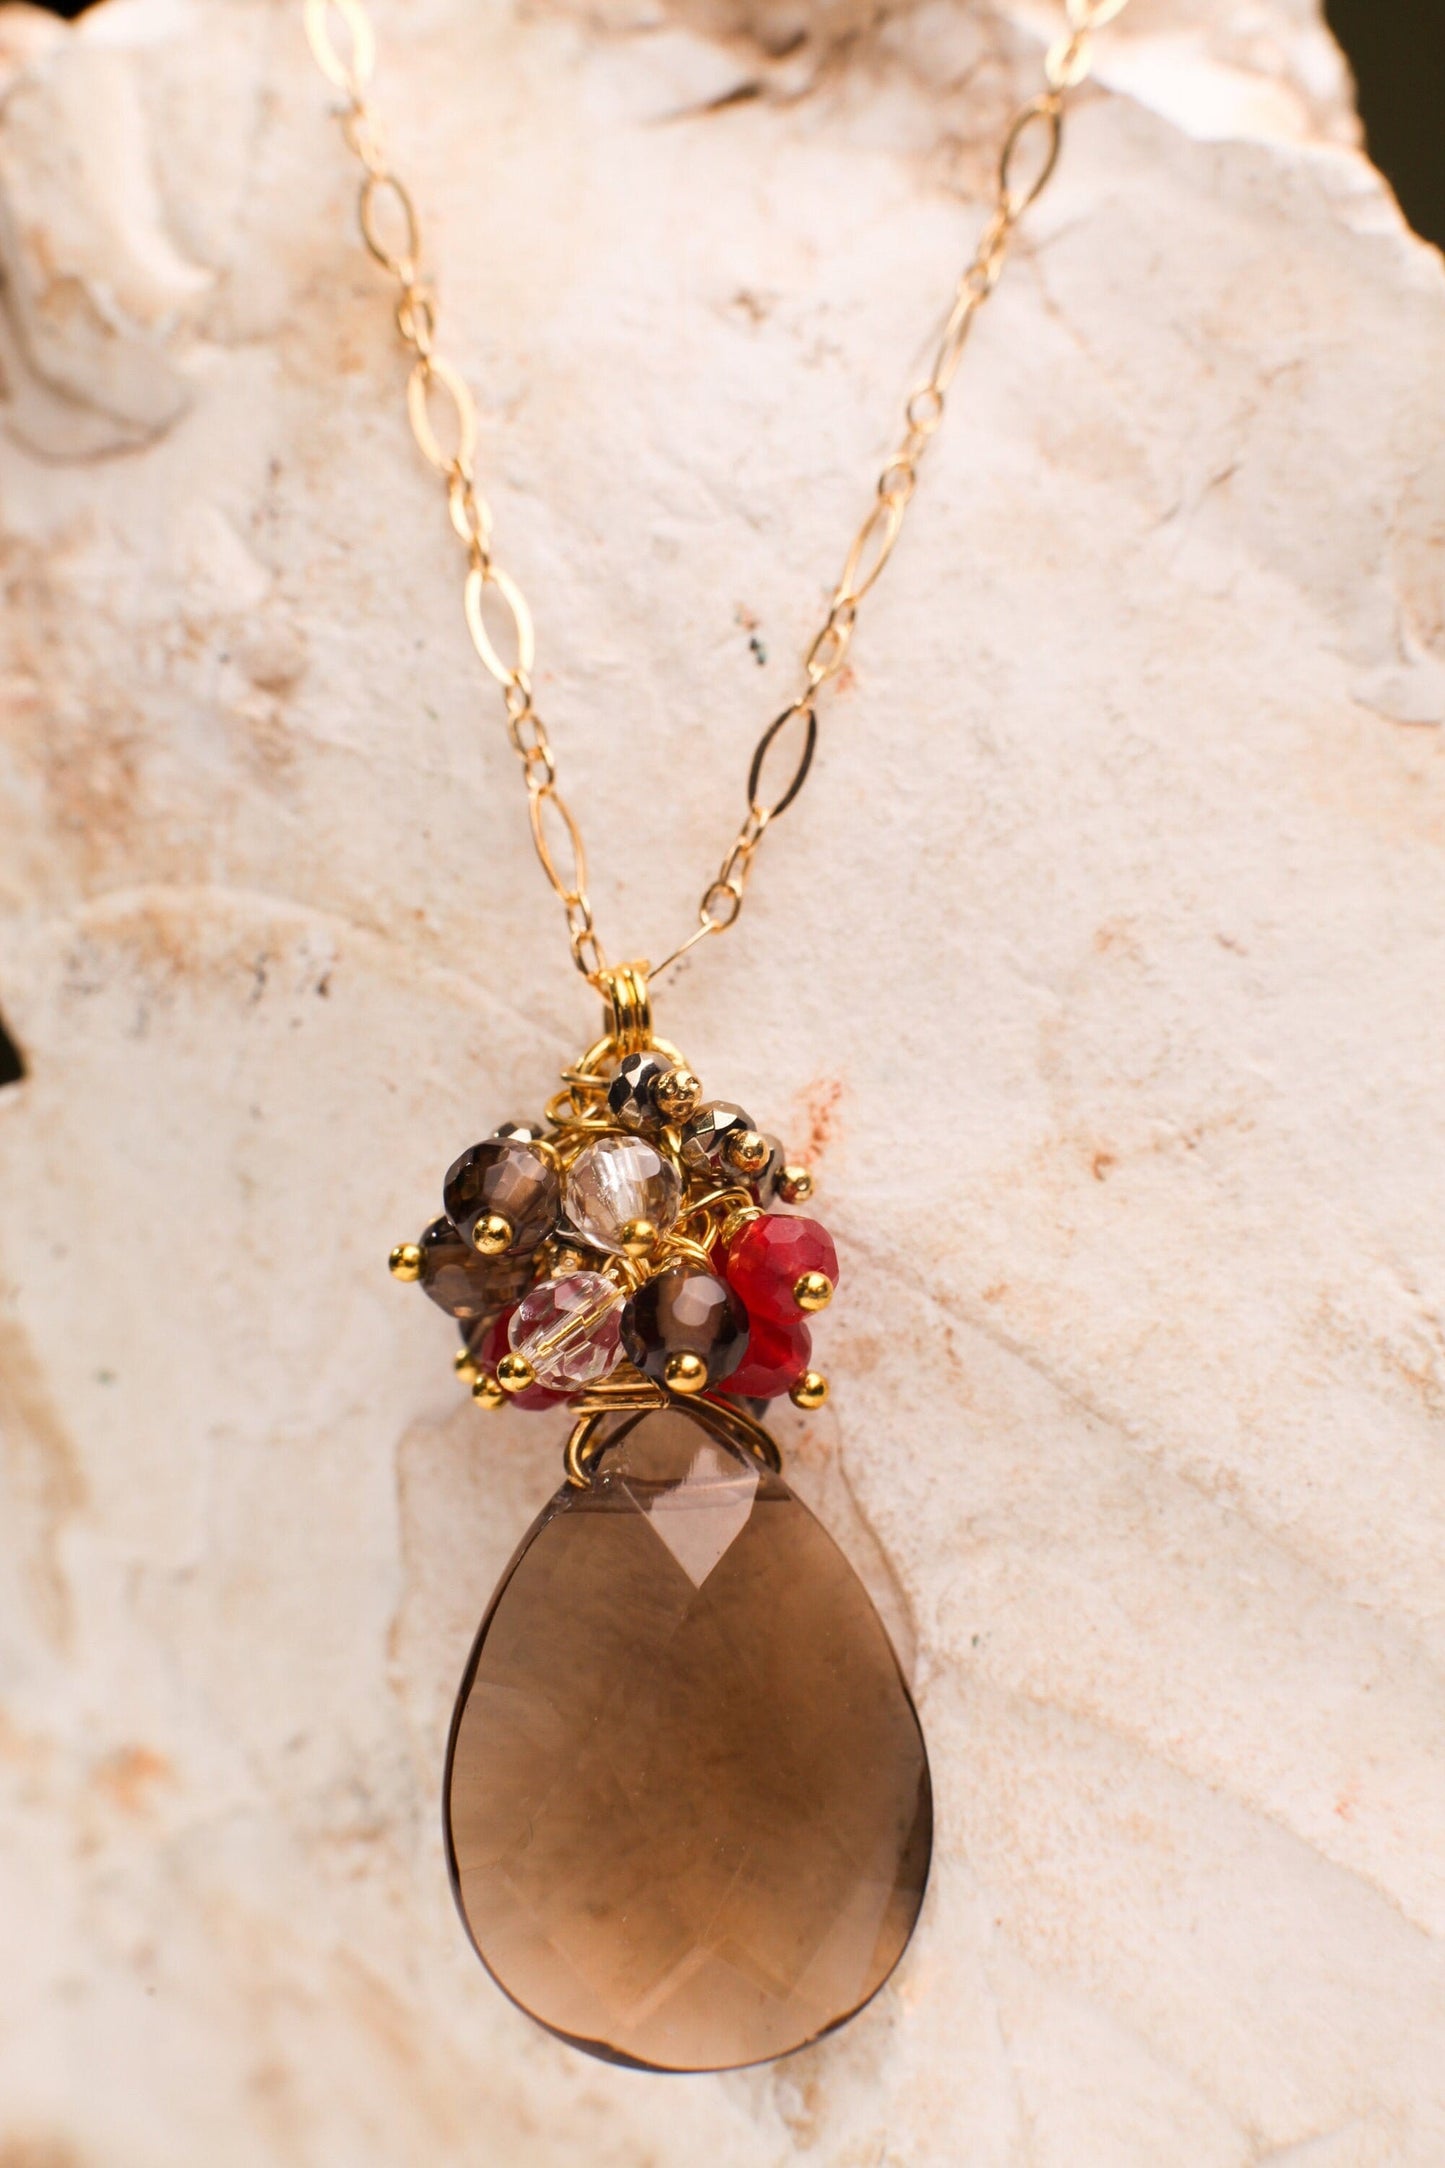 Smokey Quartz Faceted Pear Drop 18x25mm Pendant, Smokey Qz, Rock Crystal,Ruby Jade Clusters Wire Wrapped,14K Gold Filled Chain 18&quot; Necklace